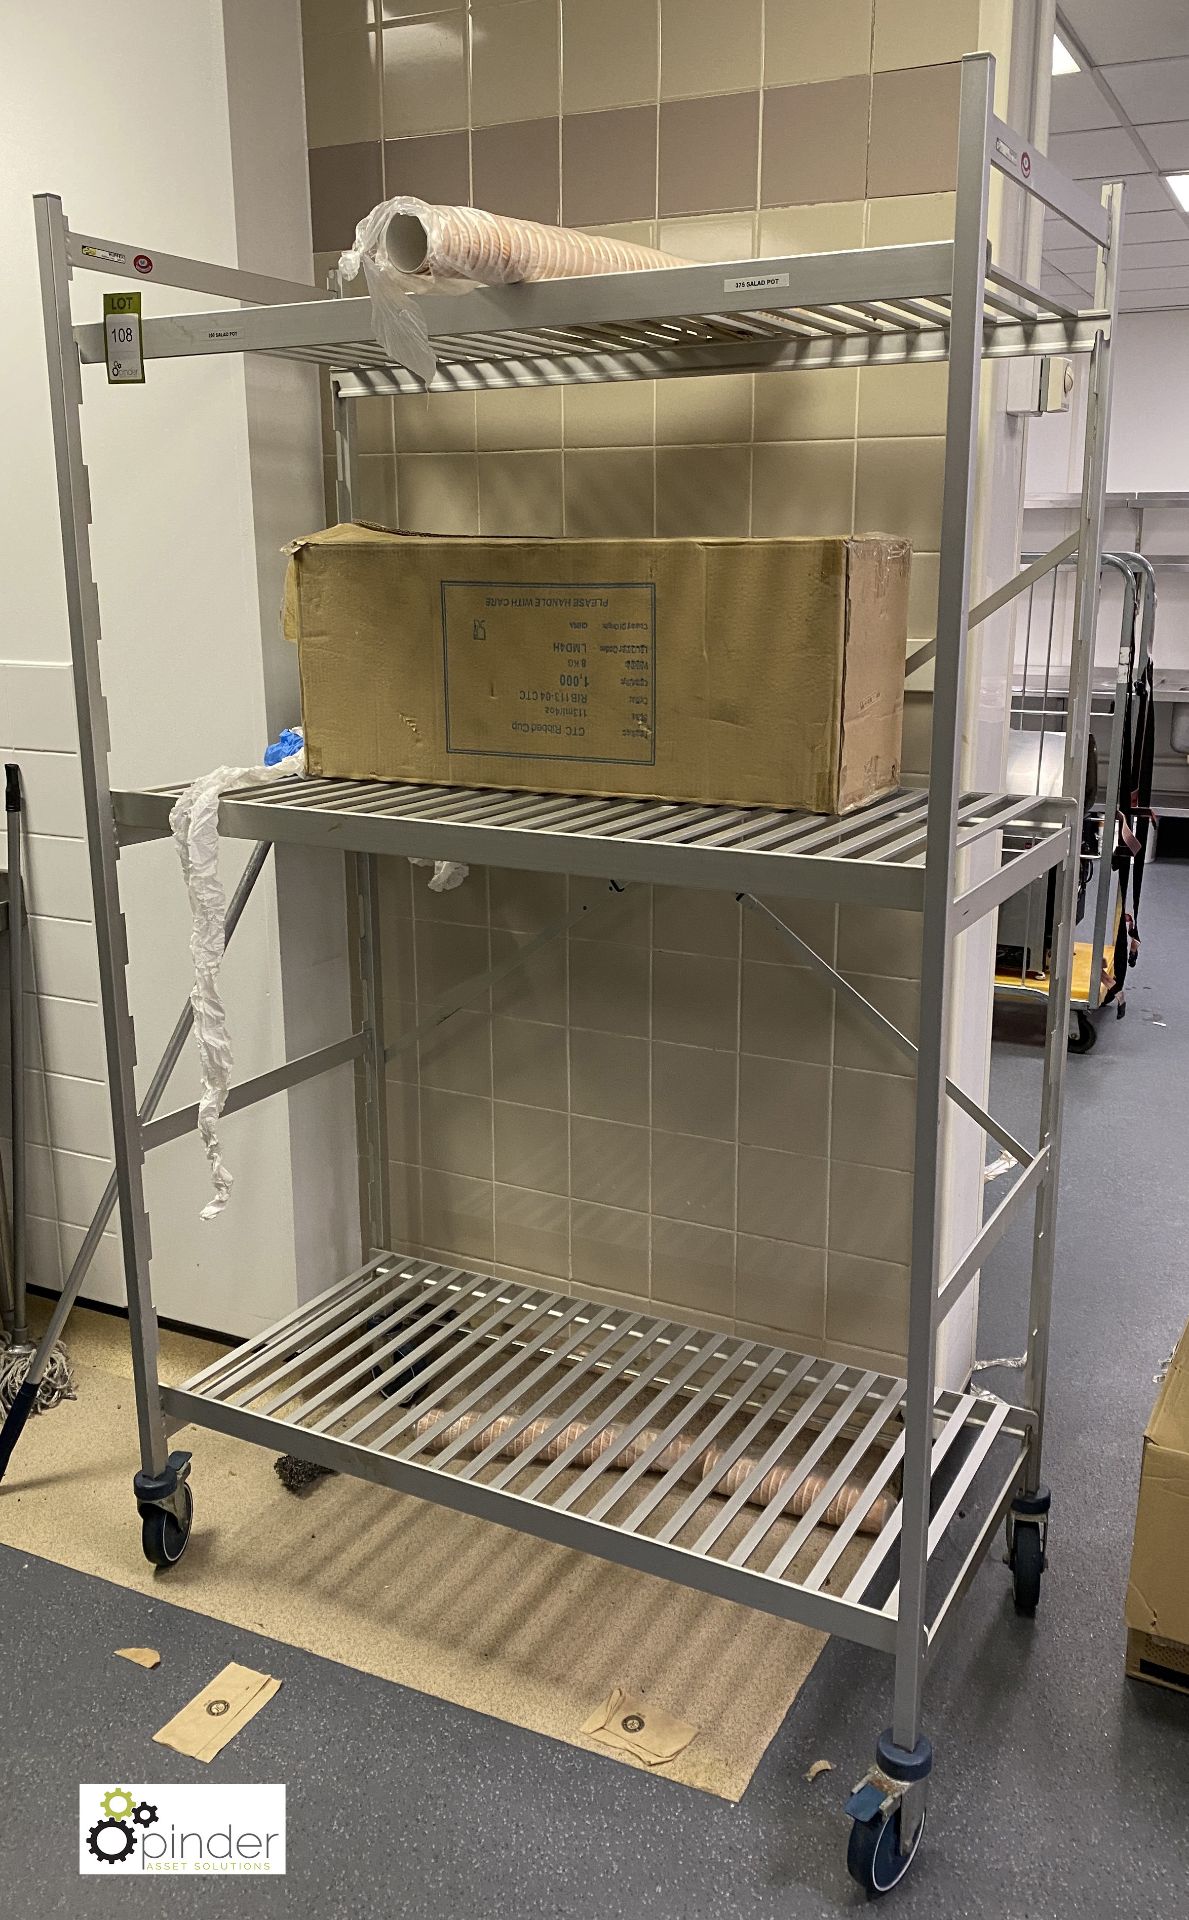 Hupfer mobile adjustable 3-shelf Rack, 1200mm x 610mm x 1950mm (contents not included) (lot location